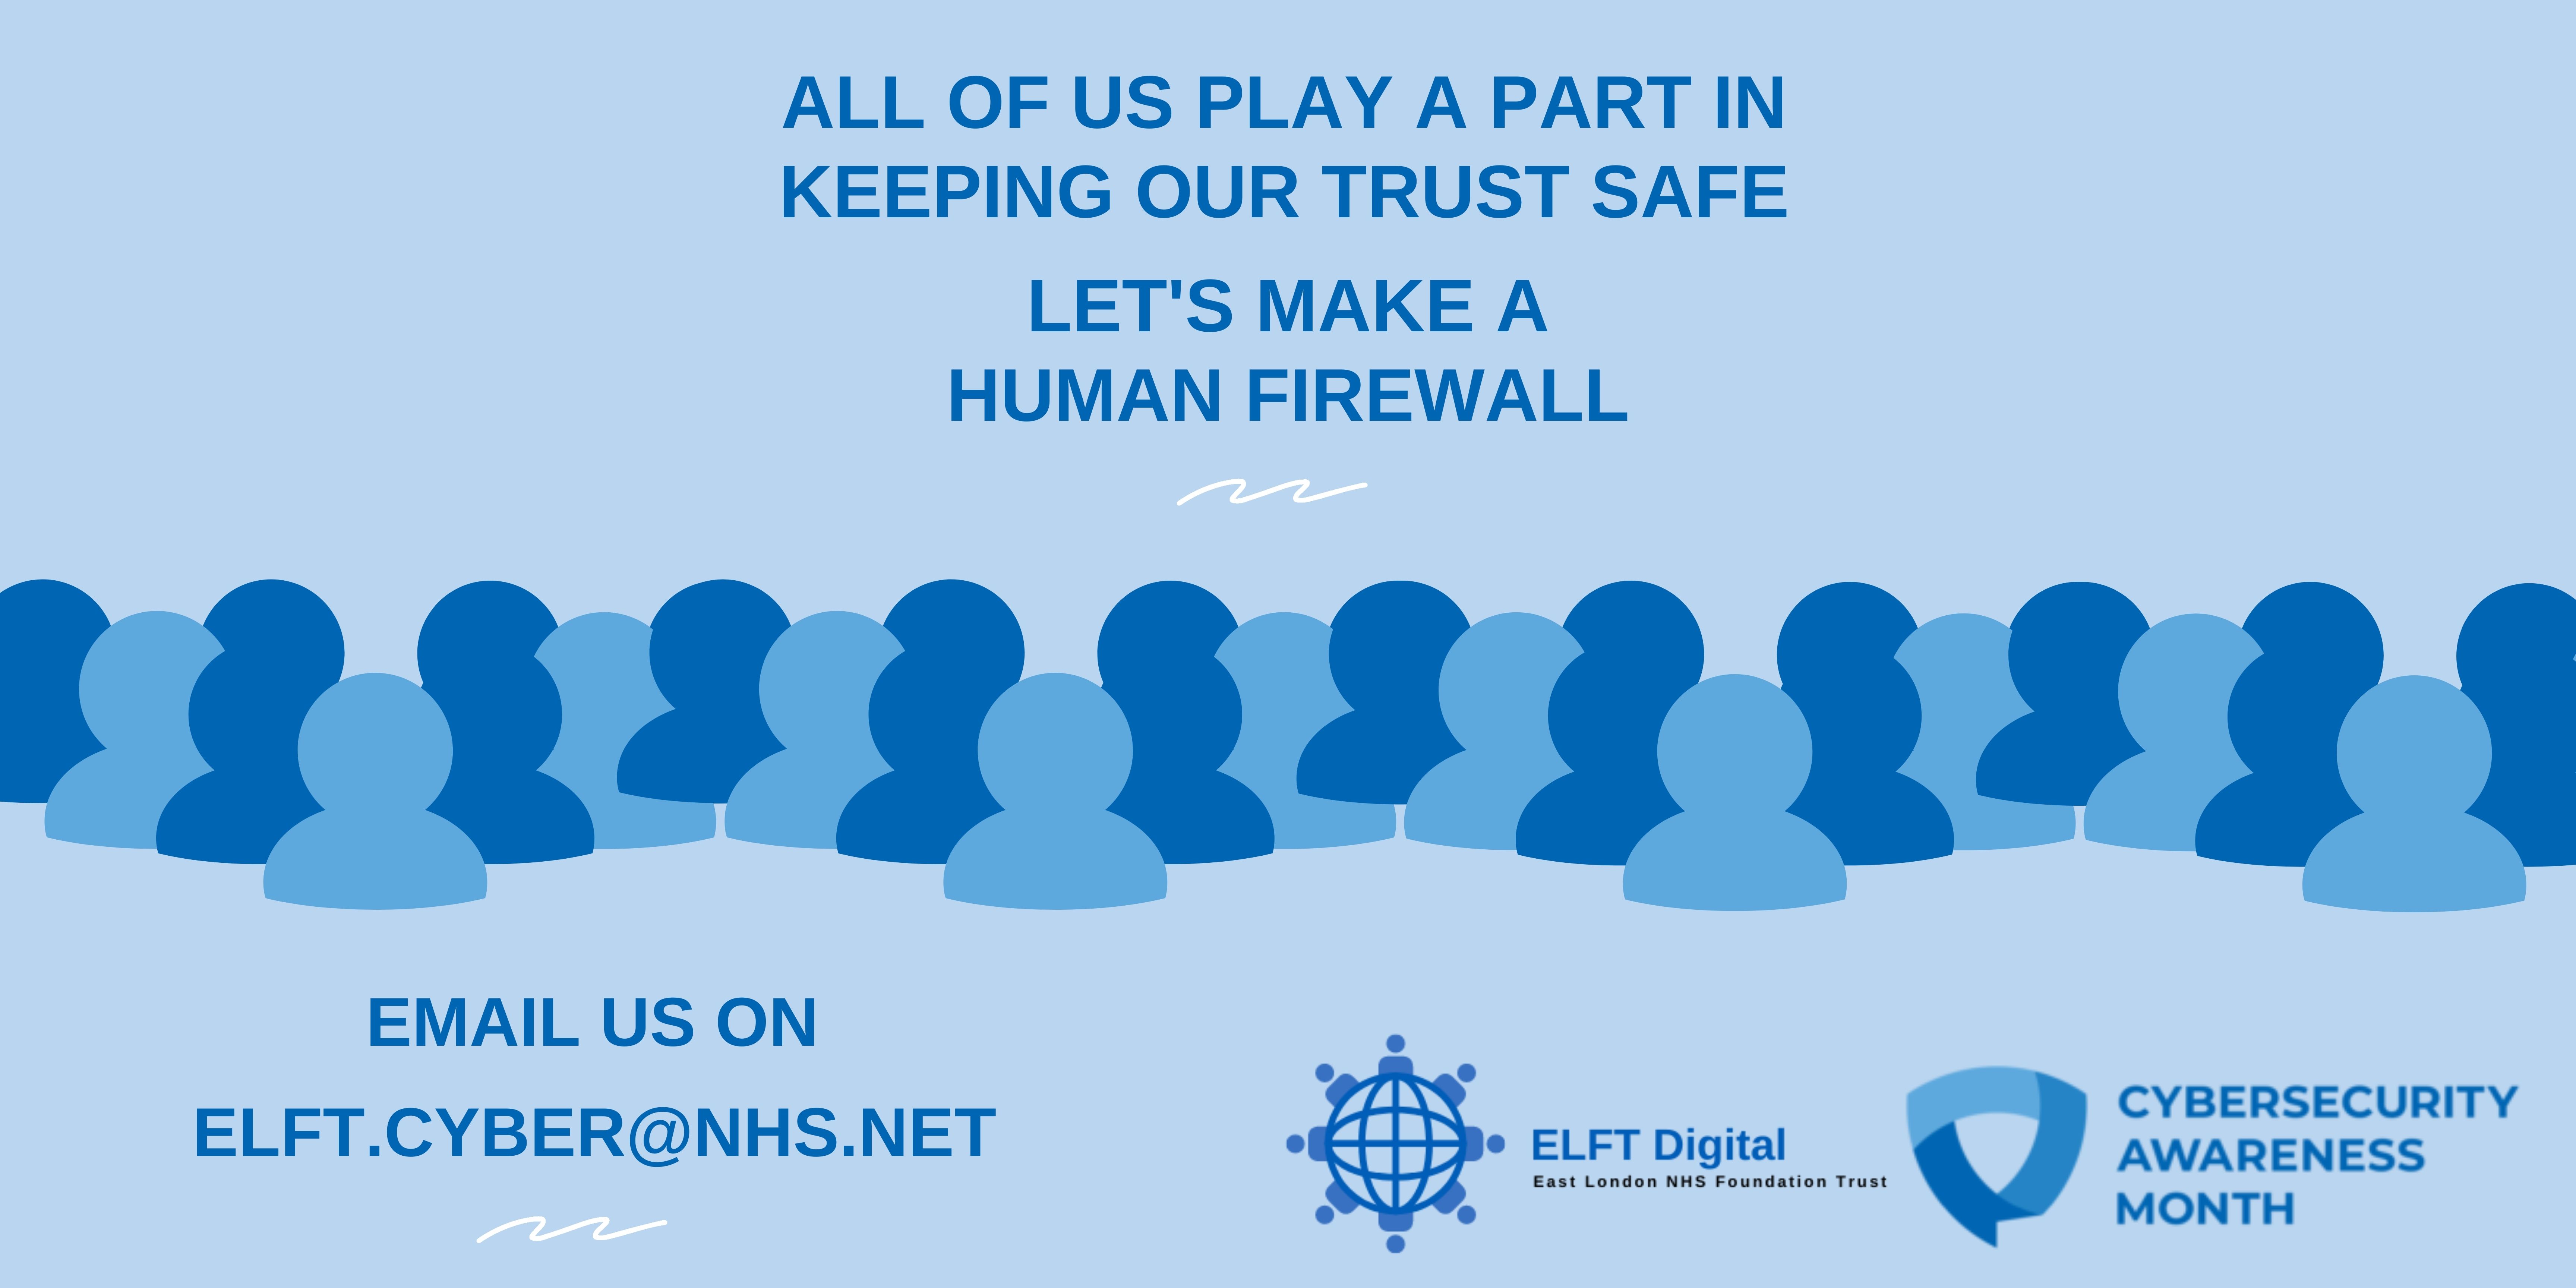 all of us play a part in keeping our trust safe, lets make a human firewall, email us on elft.cyber@nhs.net